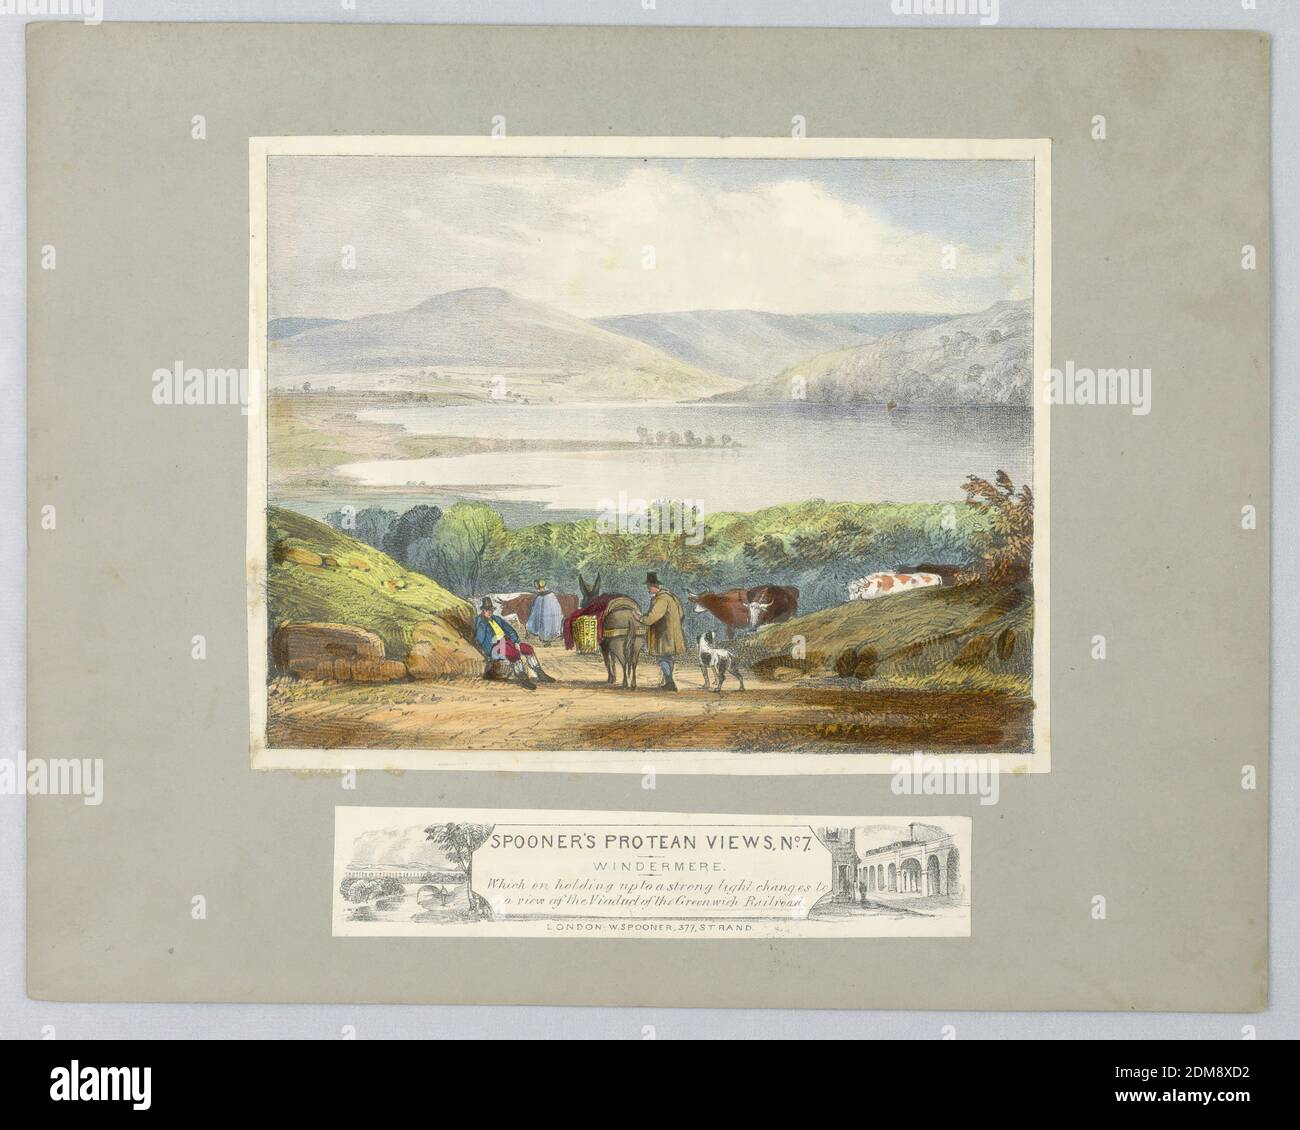 Optical Toy: 'Windermere' (Spooner's Protean Views, no. 7), William Spooner, England, active 1830 – 1854, Lithograph, brush and watercolor on paper, mounted, View of Lake Windermere seen from a hill. When held to the light, the scene shows a railway viaduct across the Lake. Below, title and: 'Which on holding up to a strong light changes to a view of the Viaduct of the Greenwich Railroad.' Publisher's name below., London, England, ca. 1838, Print Stock Photo